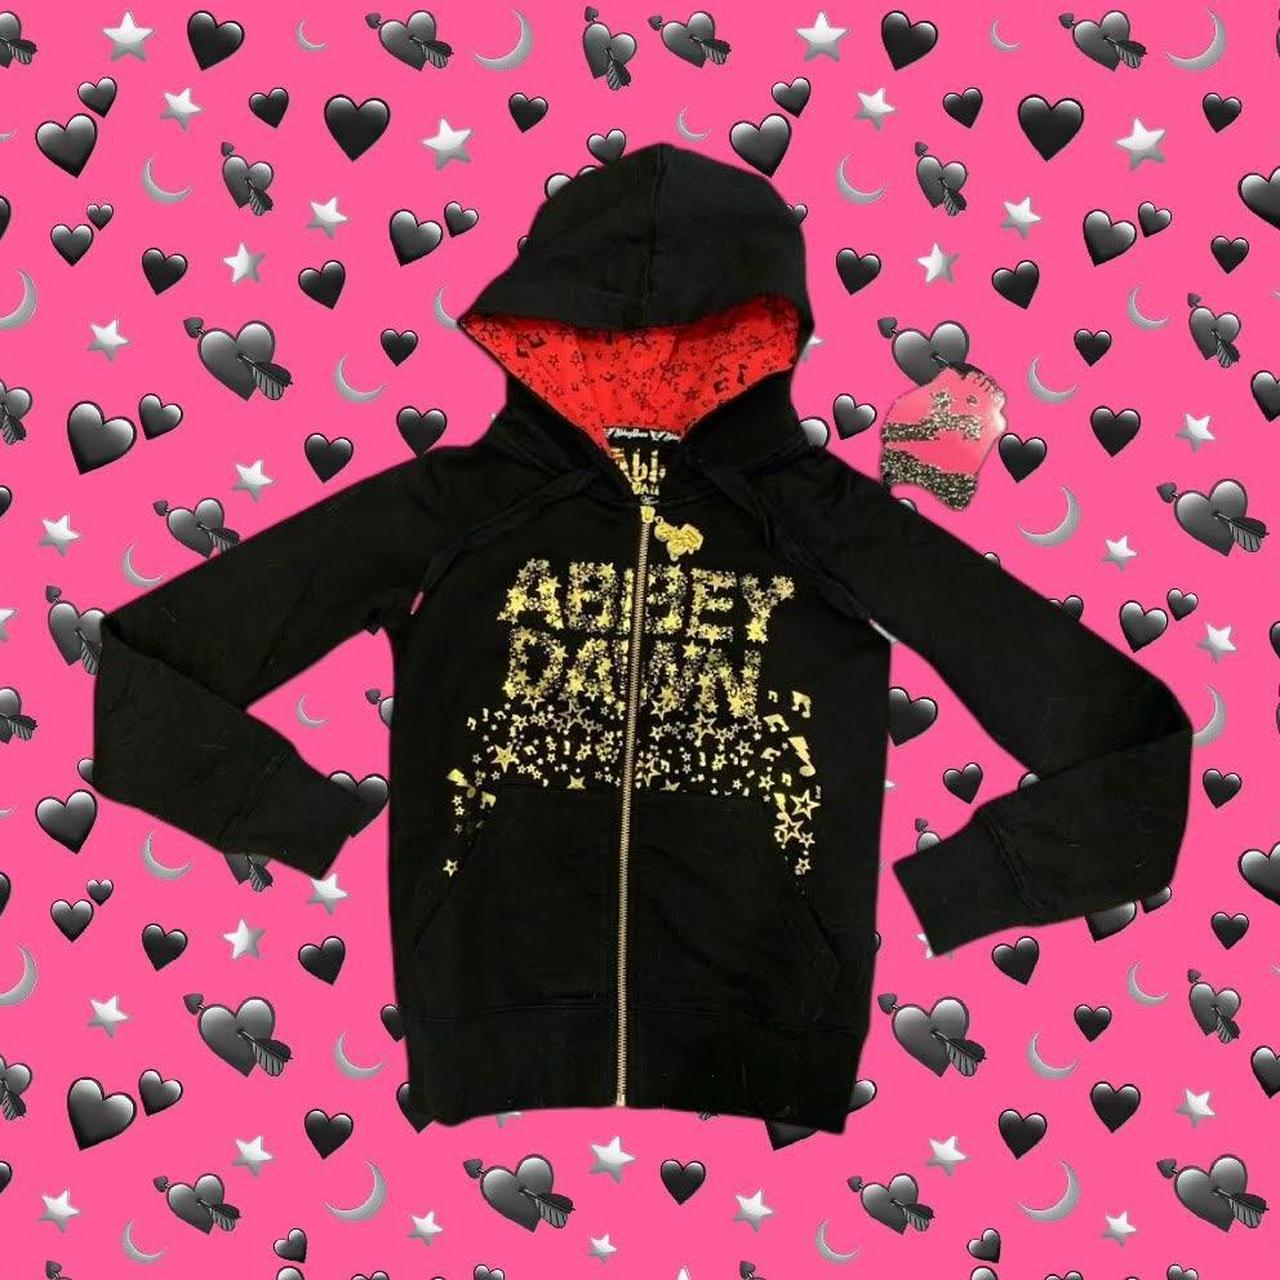 Abbey Dawn gold star hoodie *offers and holds